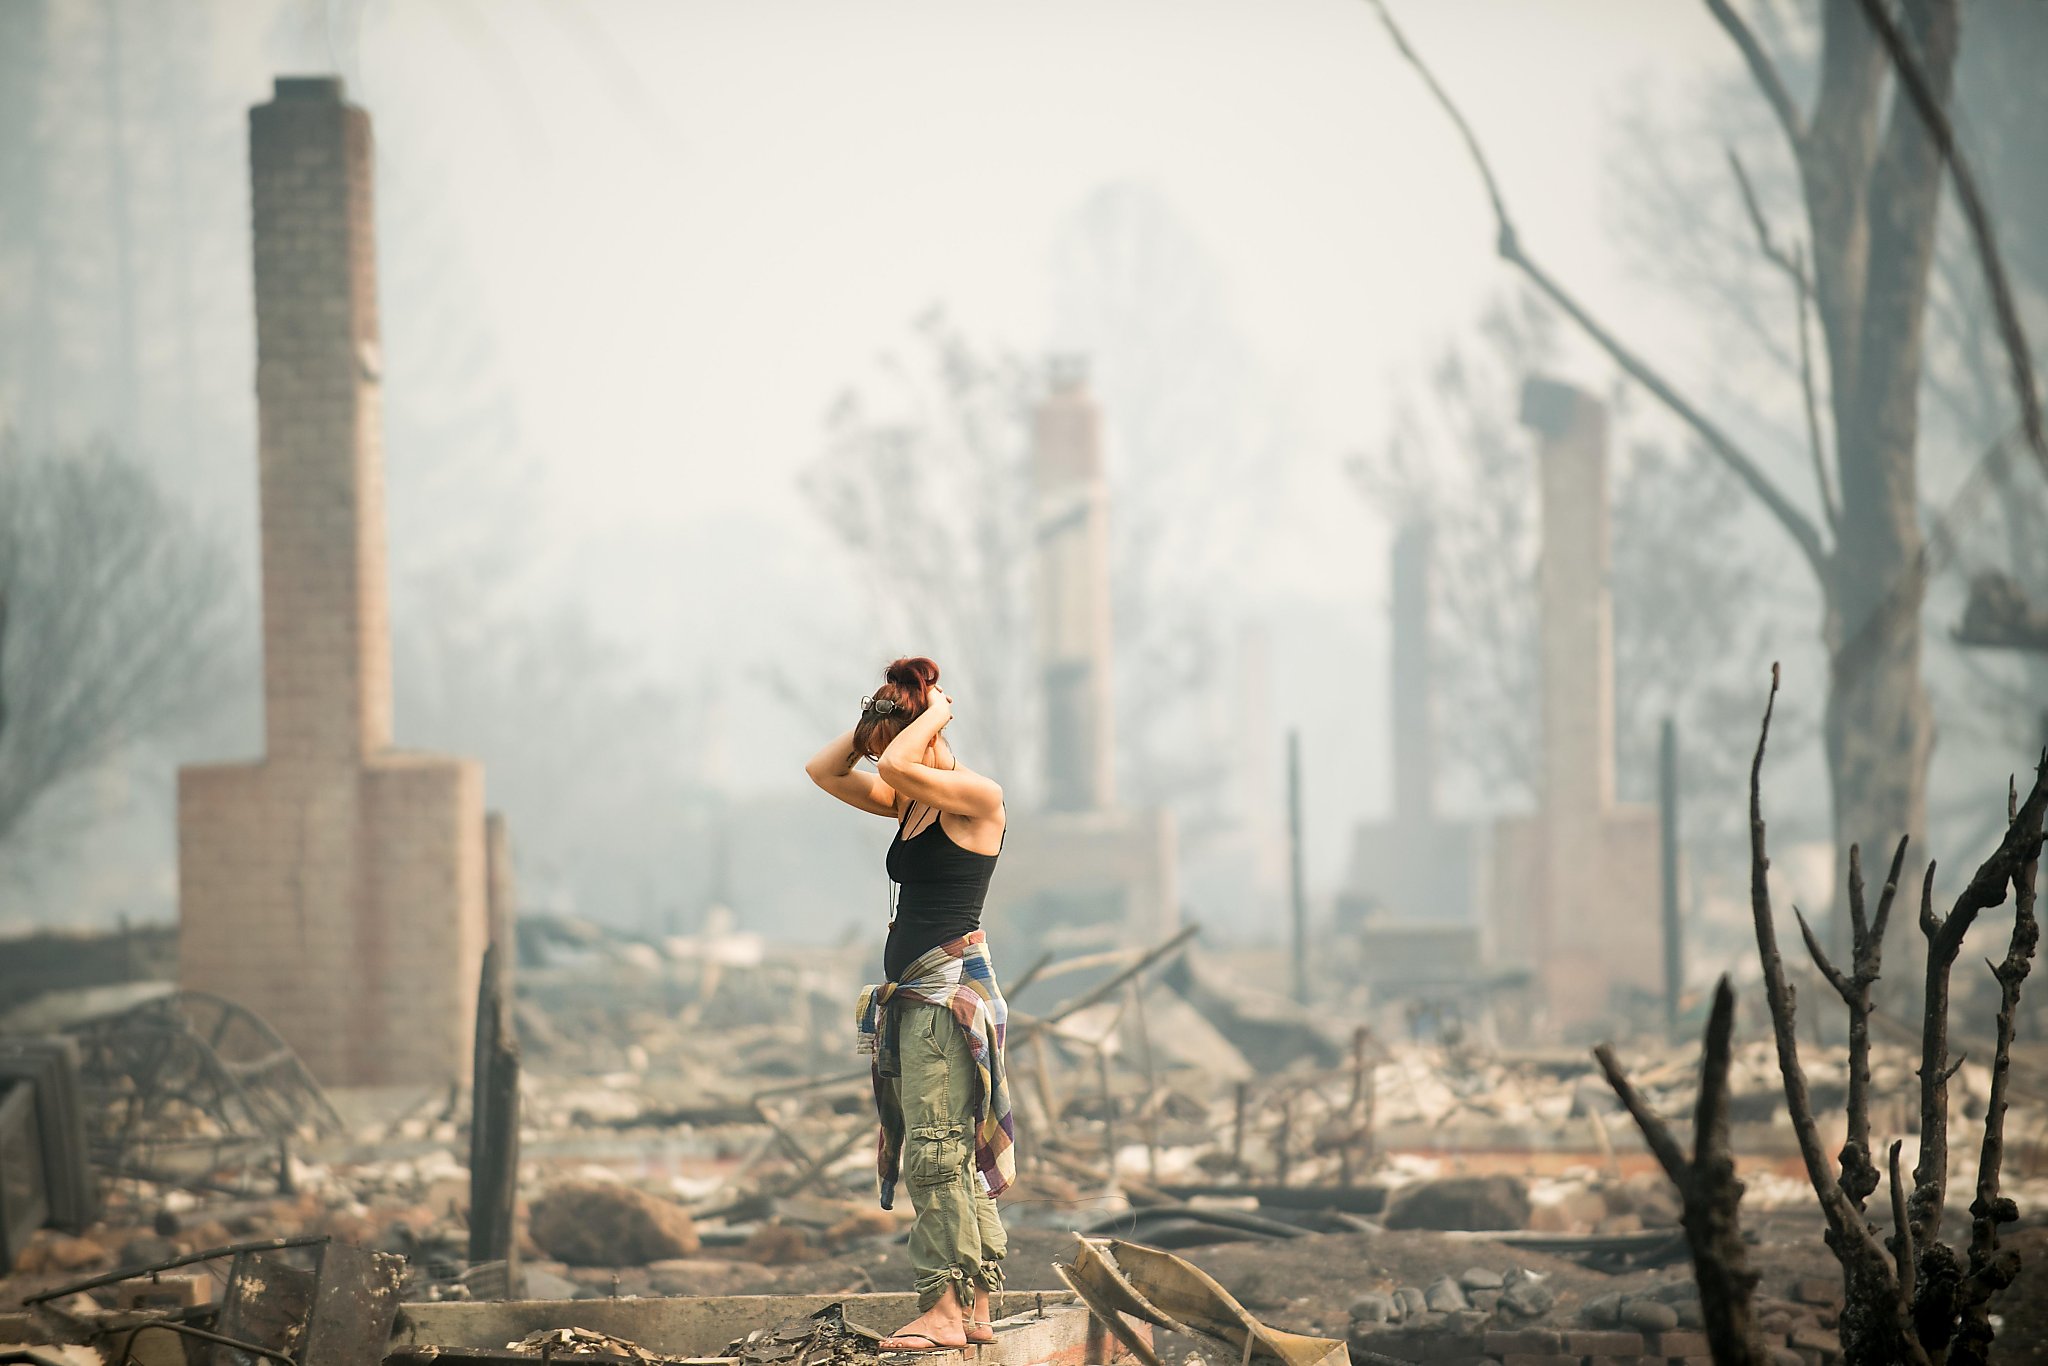 Powerful photos from the Northern California wildfires capture